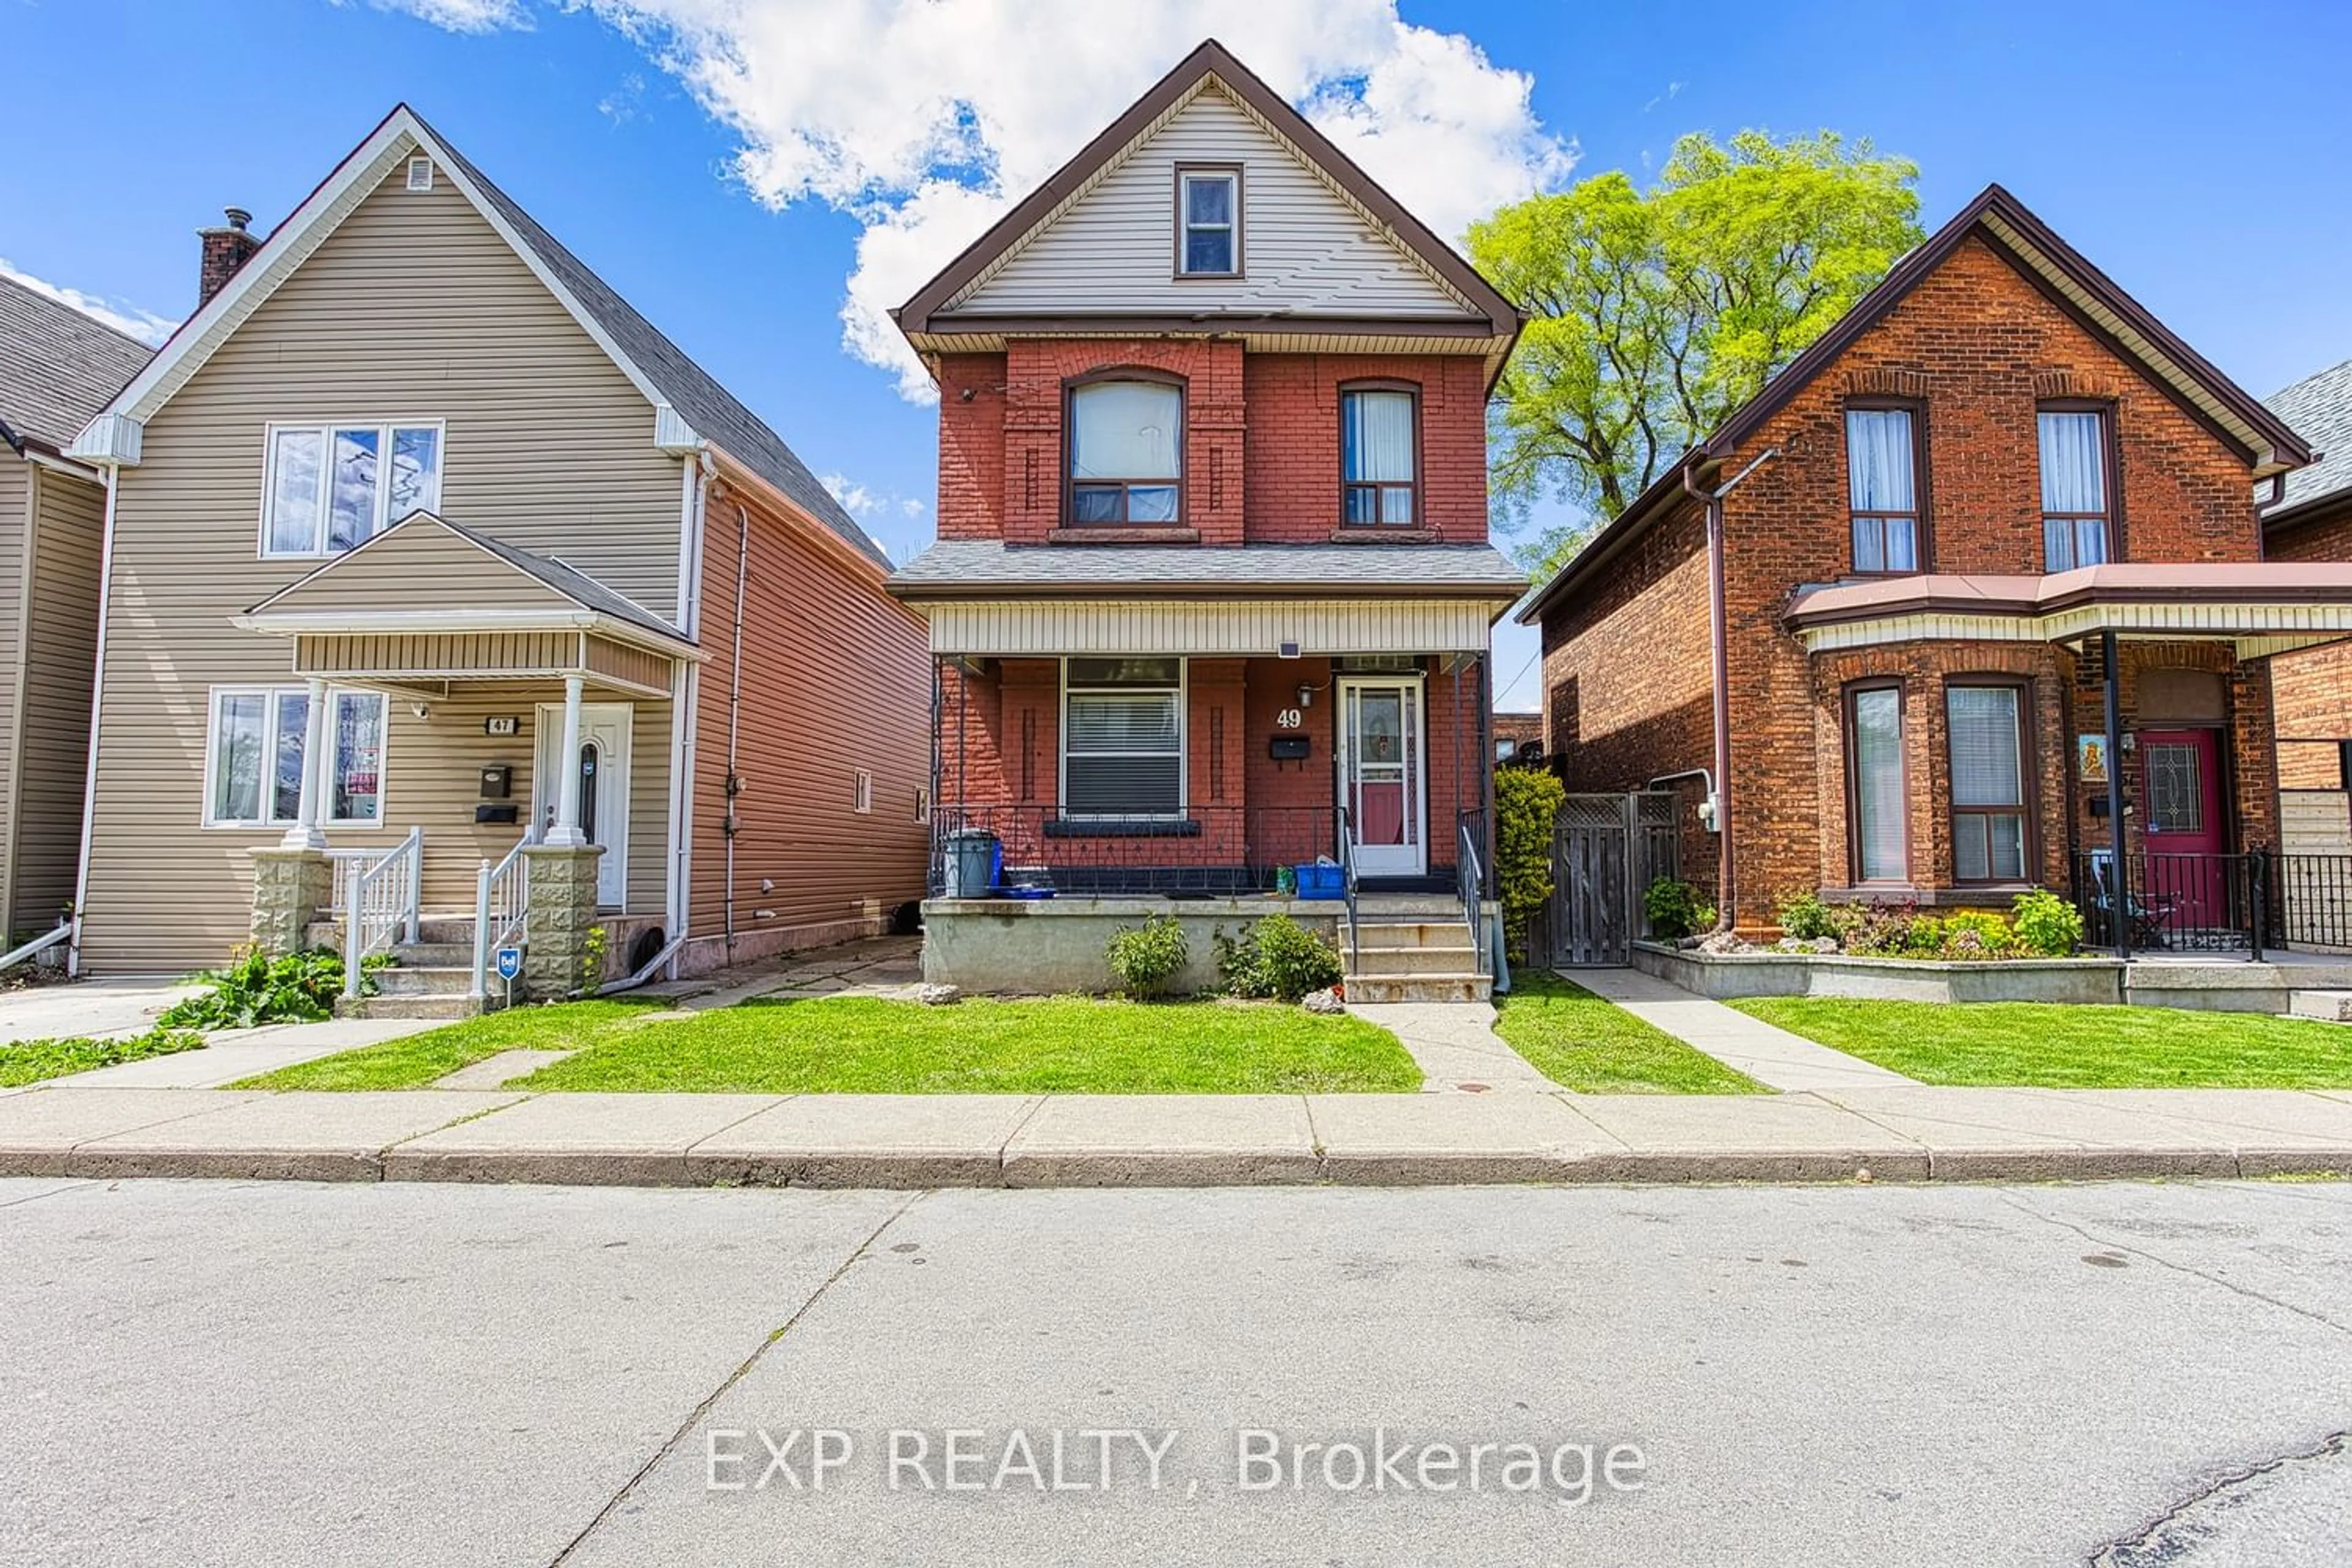 Frontside or backside of a home for 49 Leeming St, Hamilton Ontario L8L 5T4